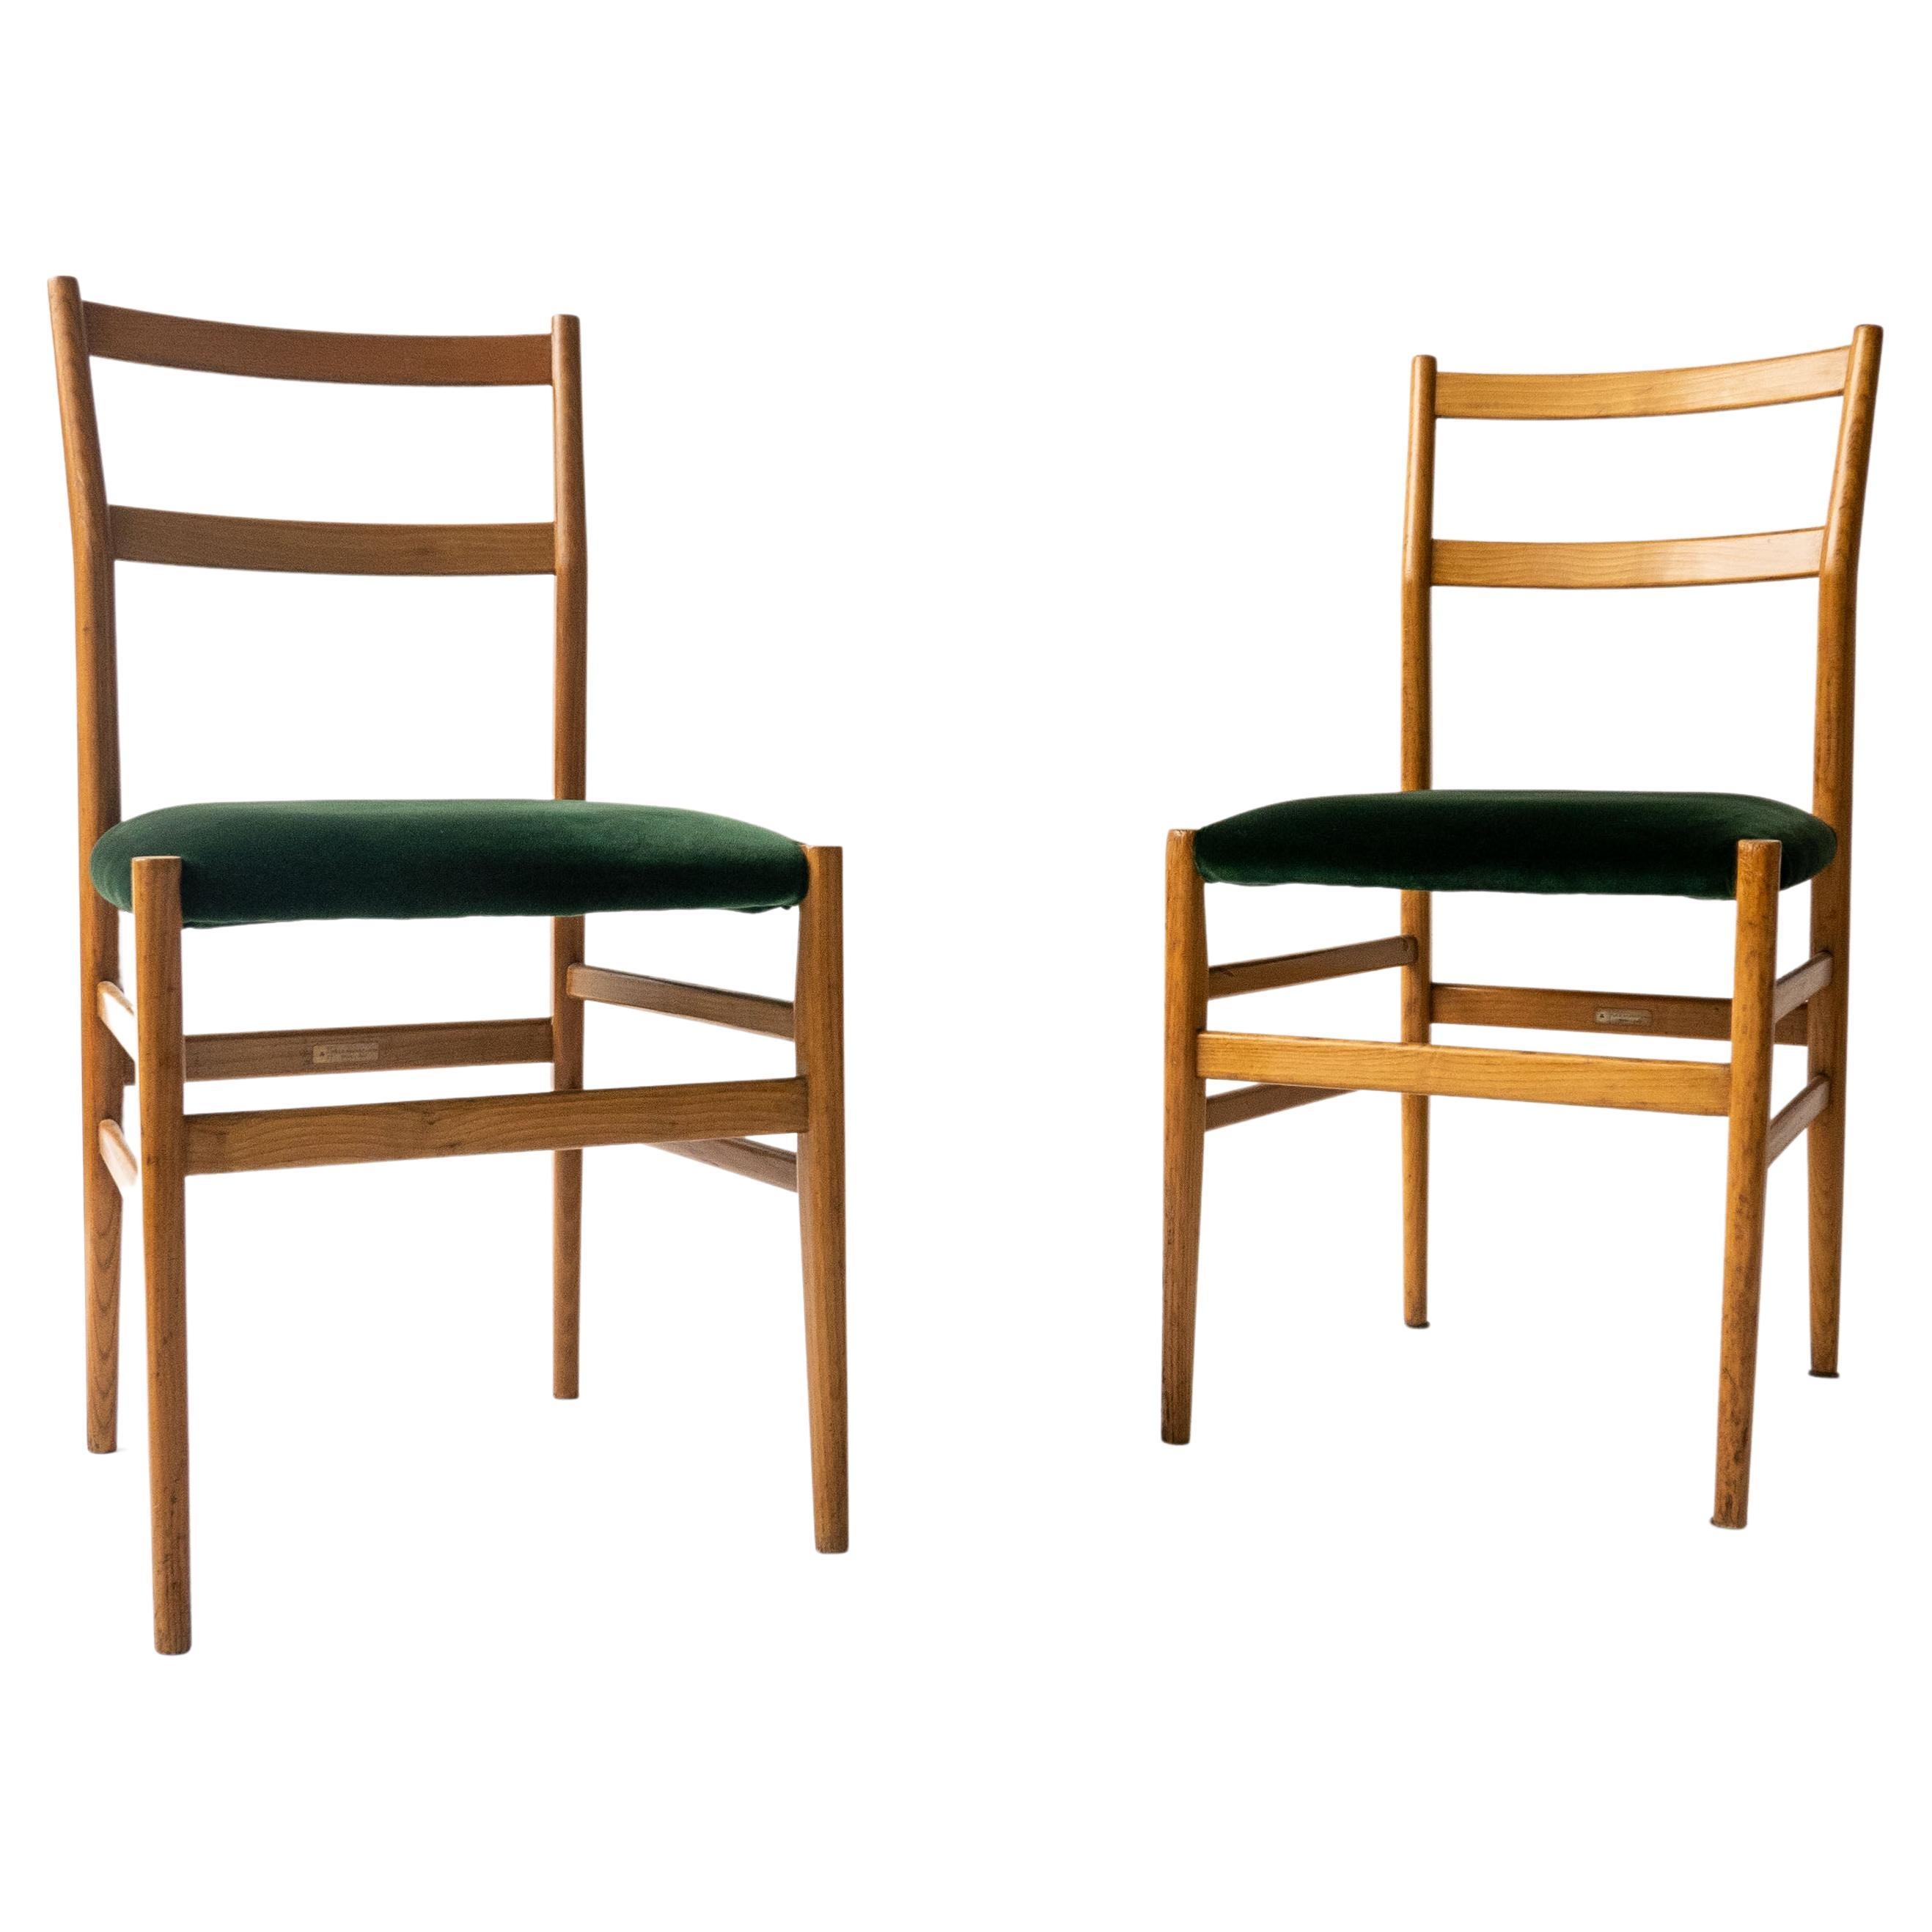 Pair of Vintage 646 Leggera Chairs by Giò Ponti for Cassina, Italian Modern